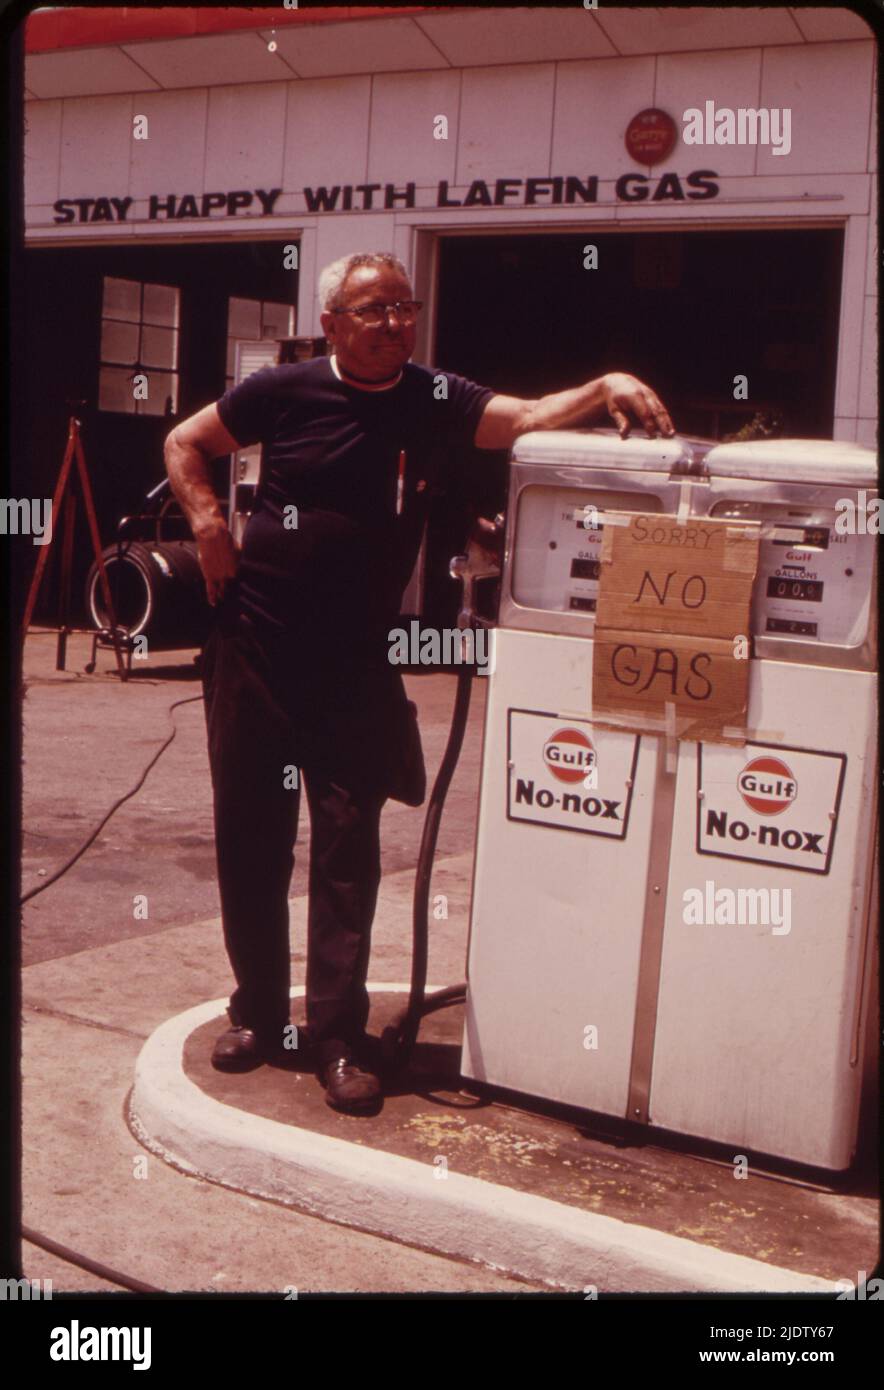 Gas station operator stands by empty gas pump during the height of the gas shortage, no location, 1973. Stock Photo